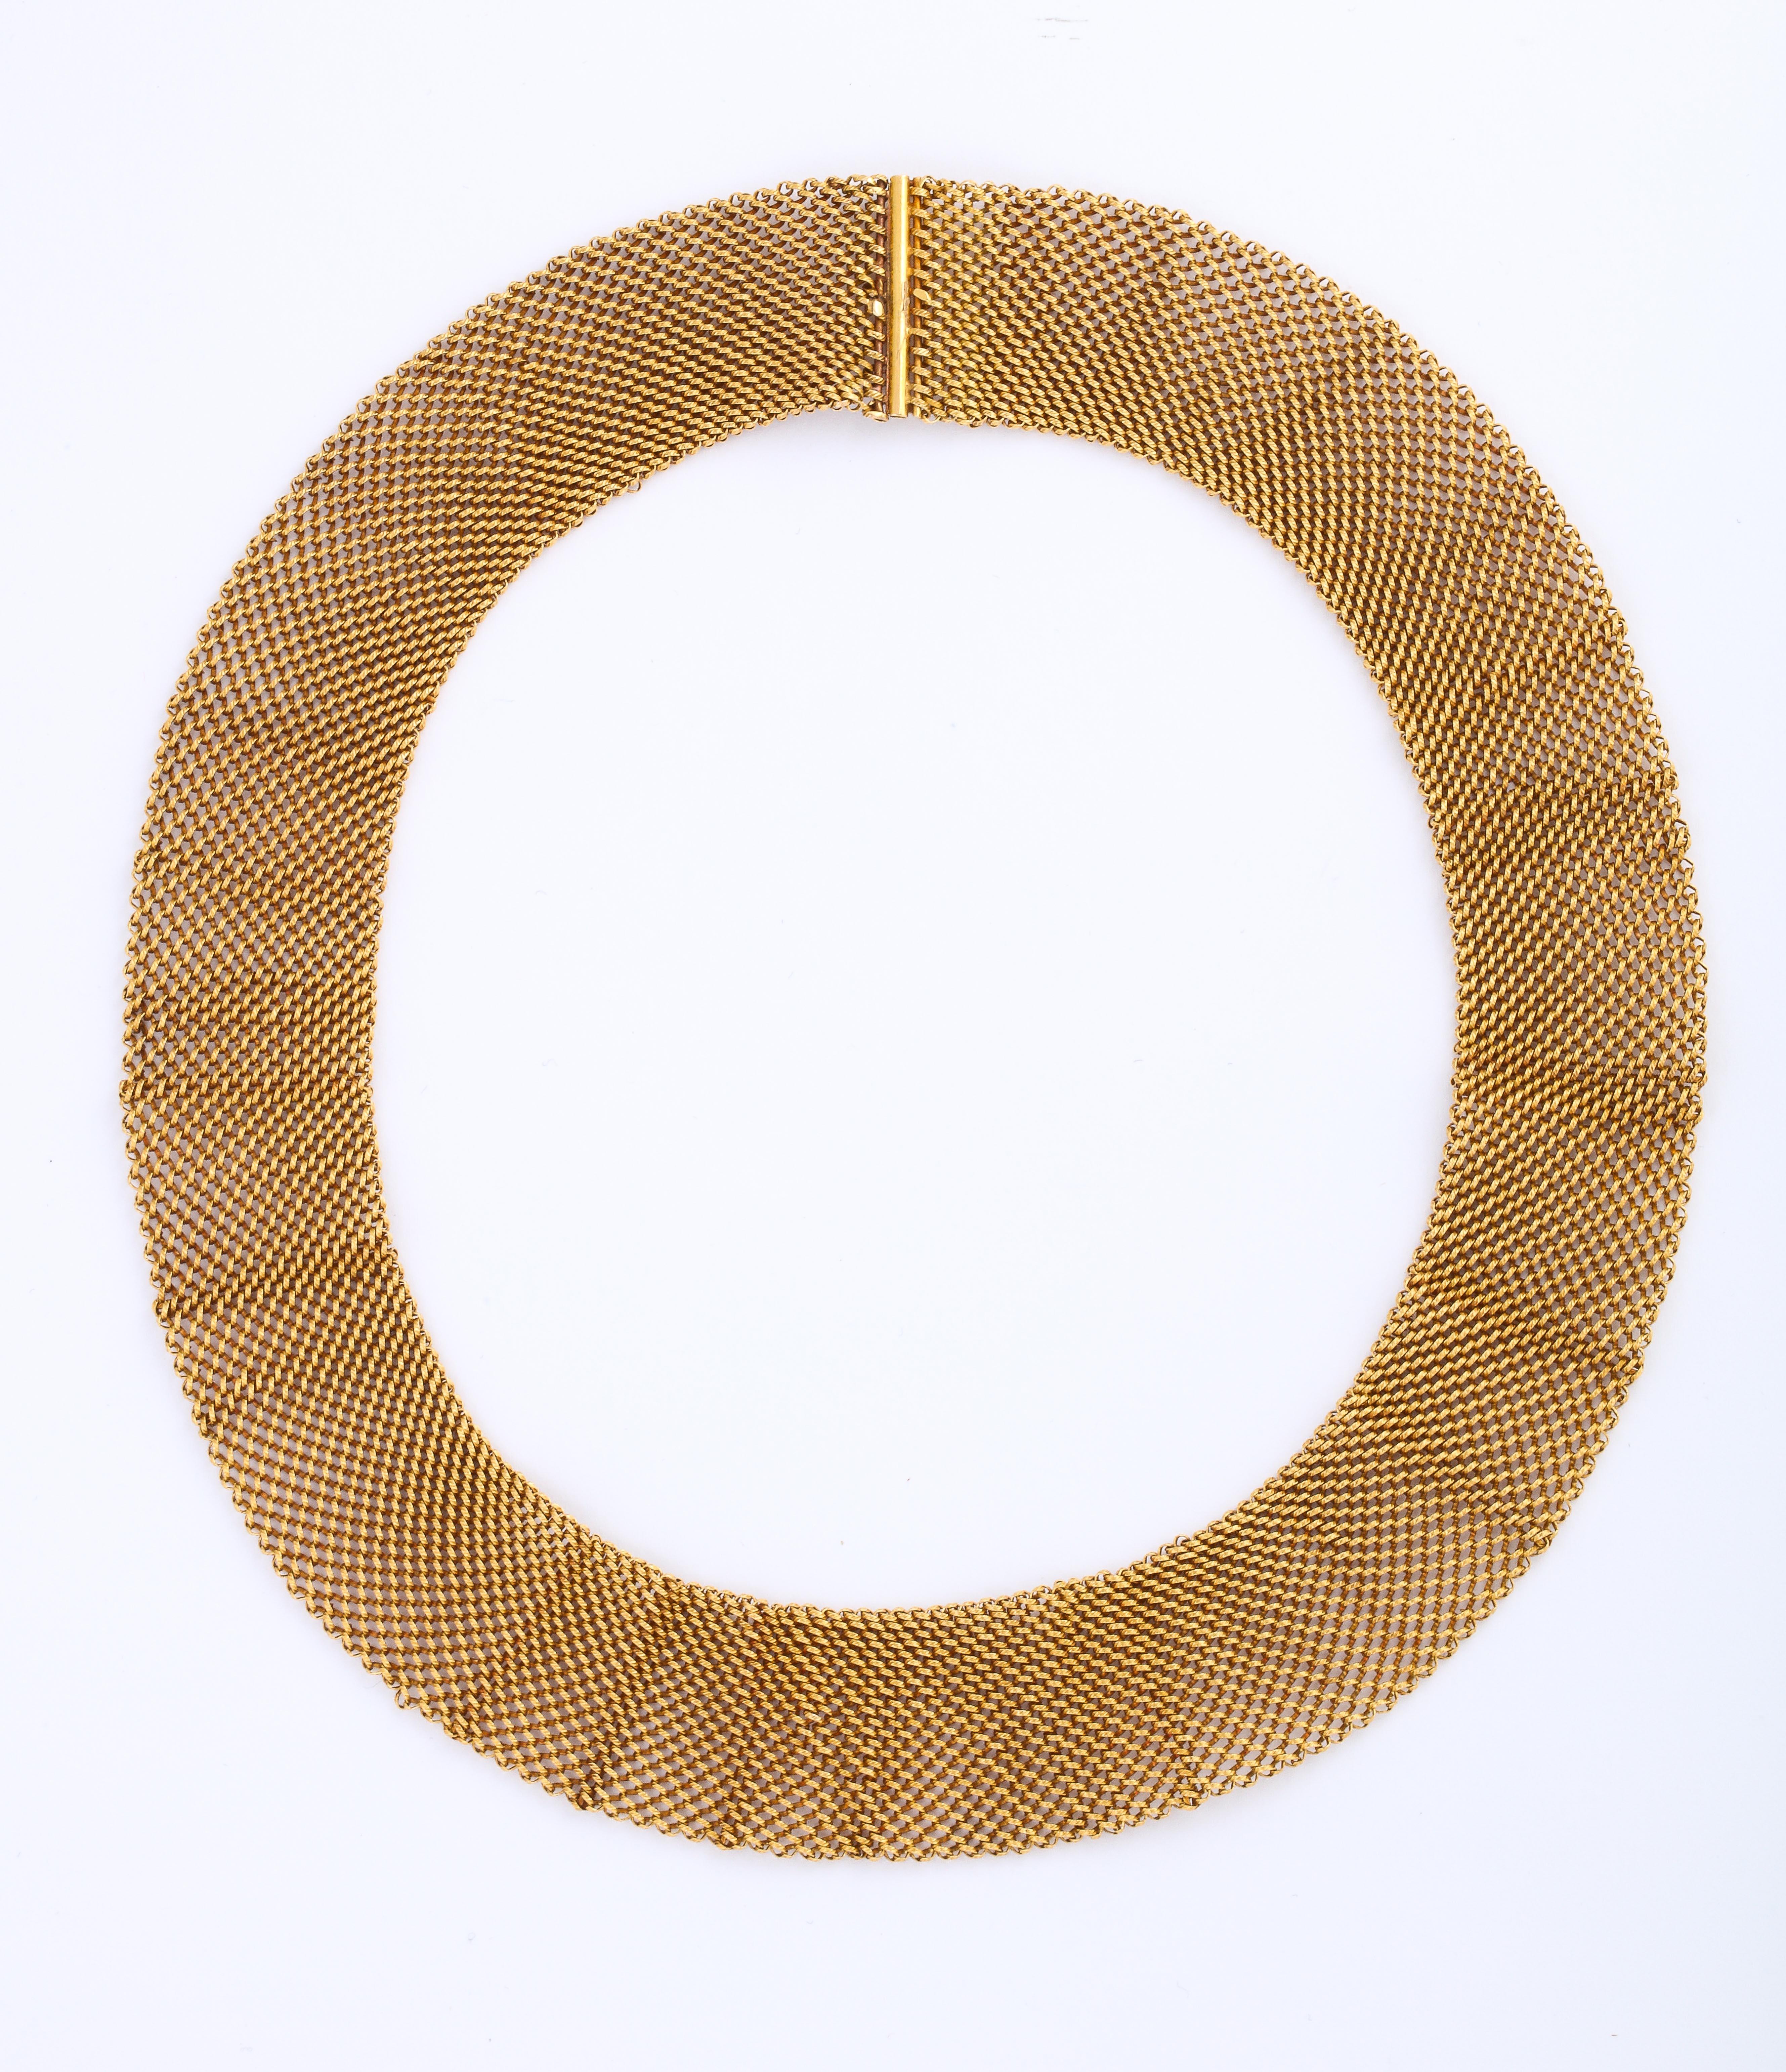 A stunning  Gold Mesh Collar in 14 k gold  which is soft and flexible and easy  to lay around the neck 
You can add a clip or interesting brooch. as an art piece.
Everyday wearable.